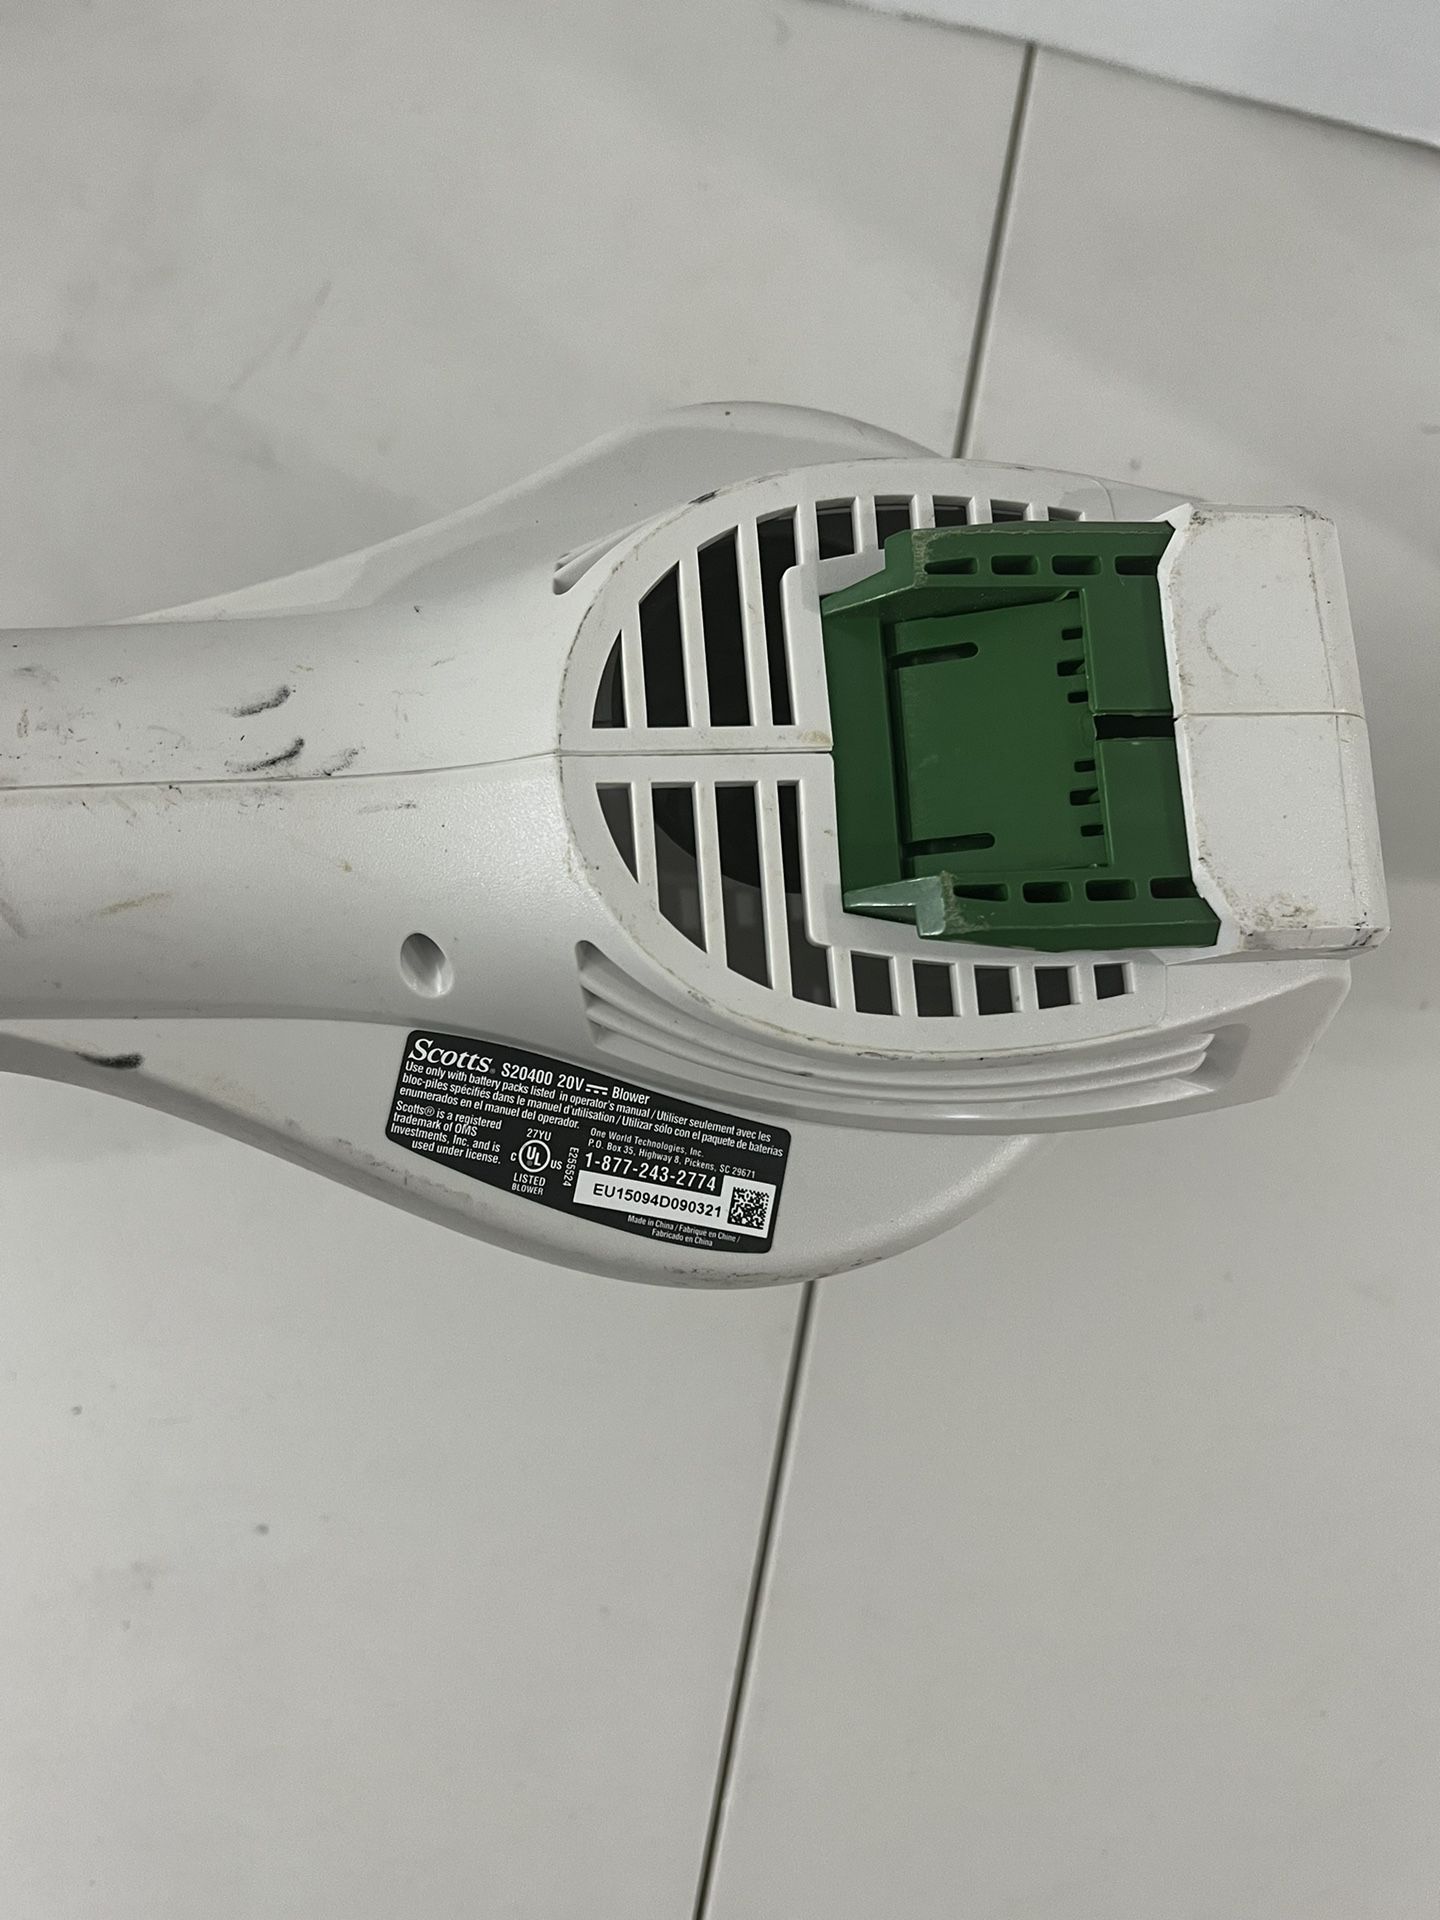 Black + Decker 20V blower sweeper LSW221 bare tool only - New for Sale in  Portland, OR - OfferUp